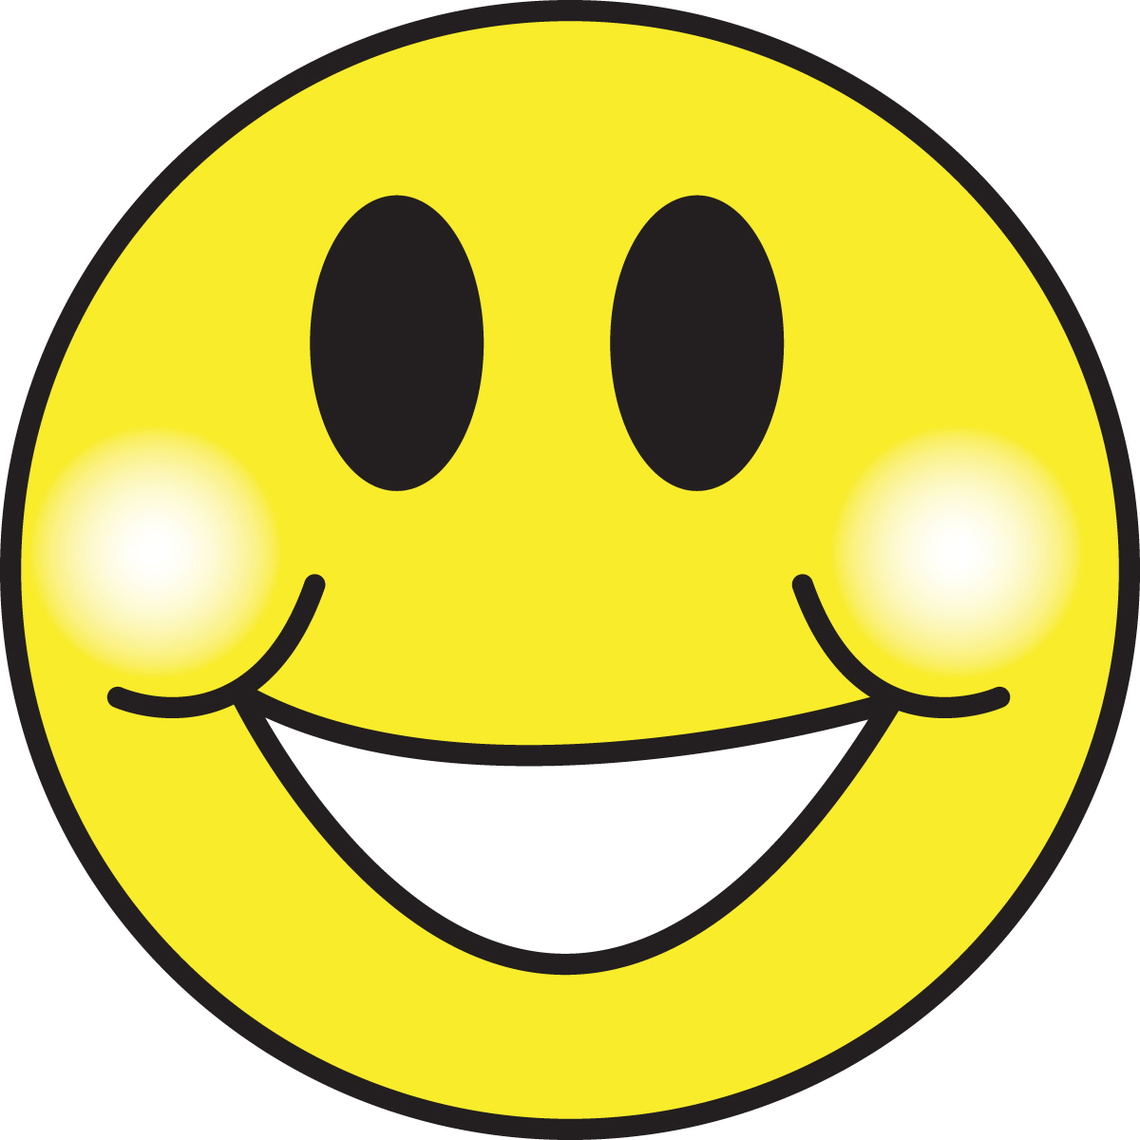 Smiley Face Very Happy Clipart - Free to use Clip Art Resource